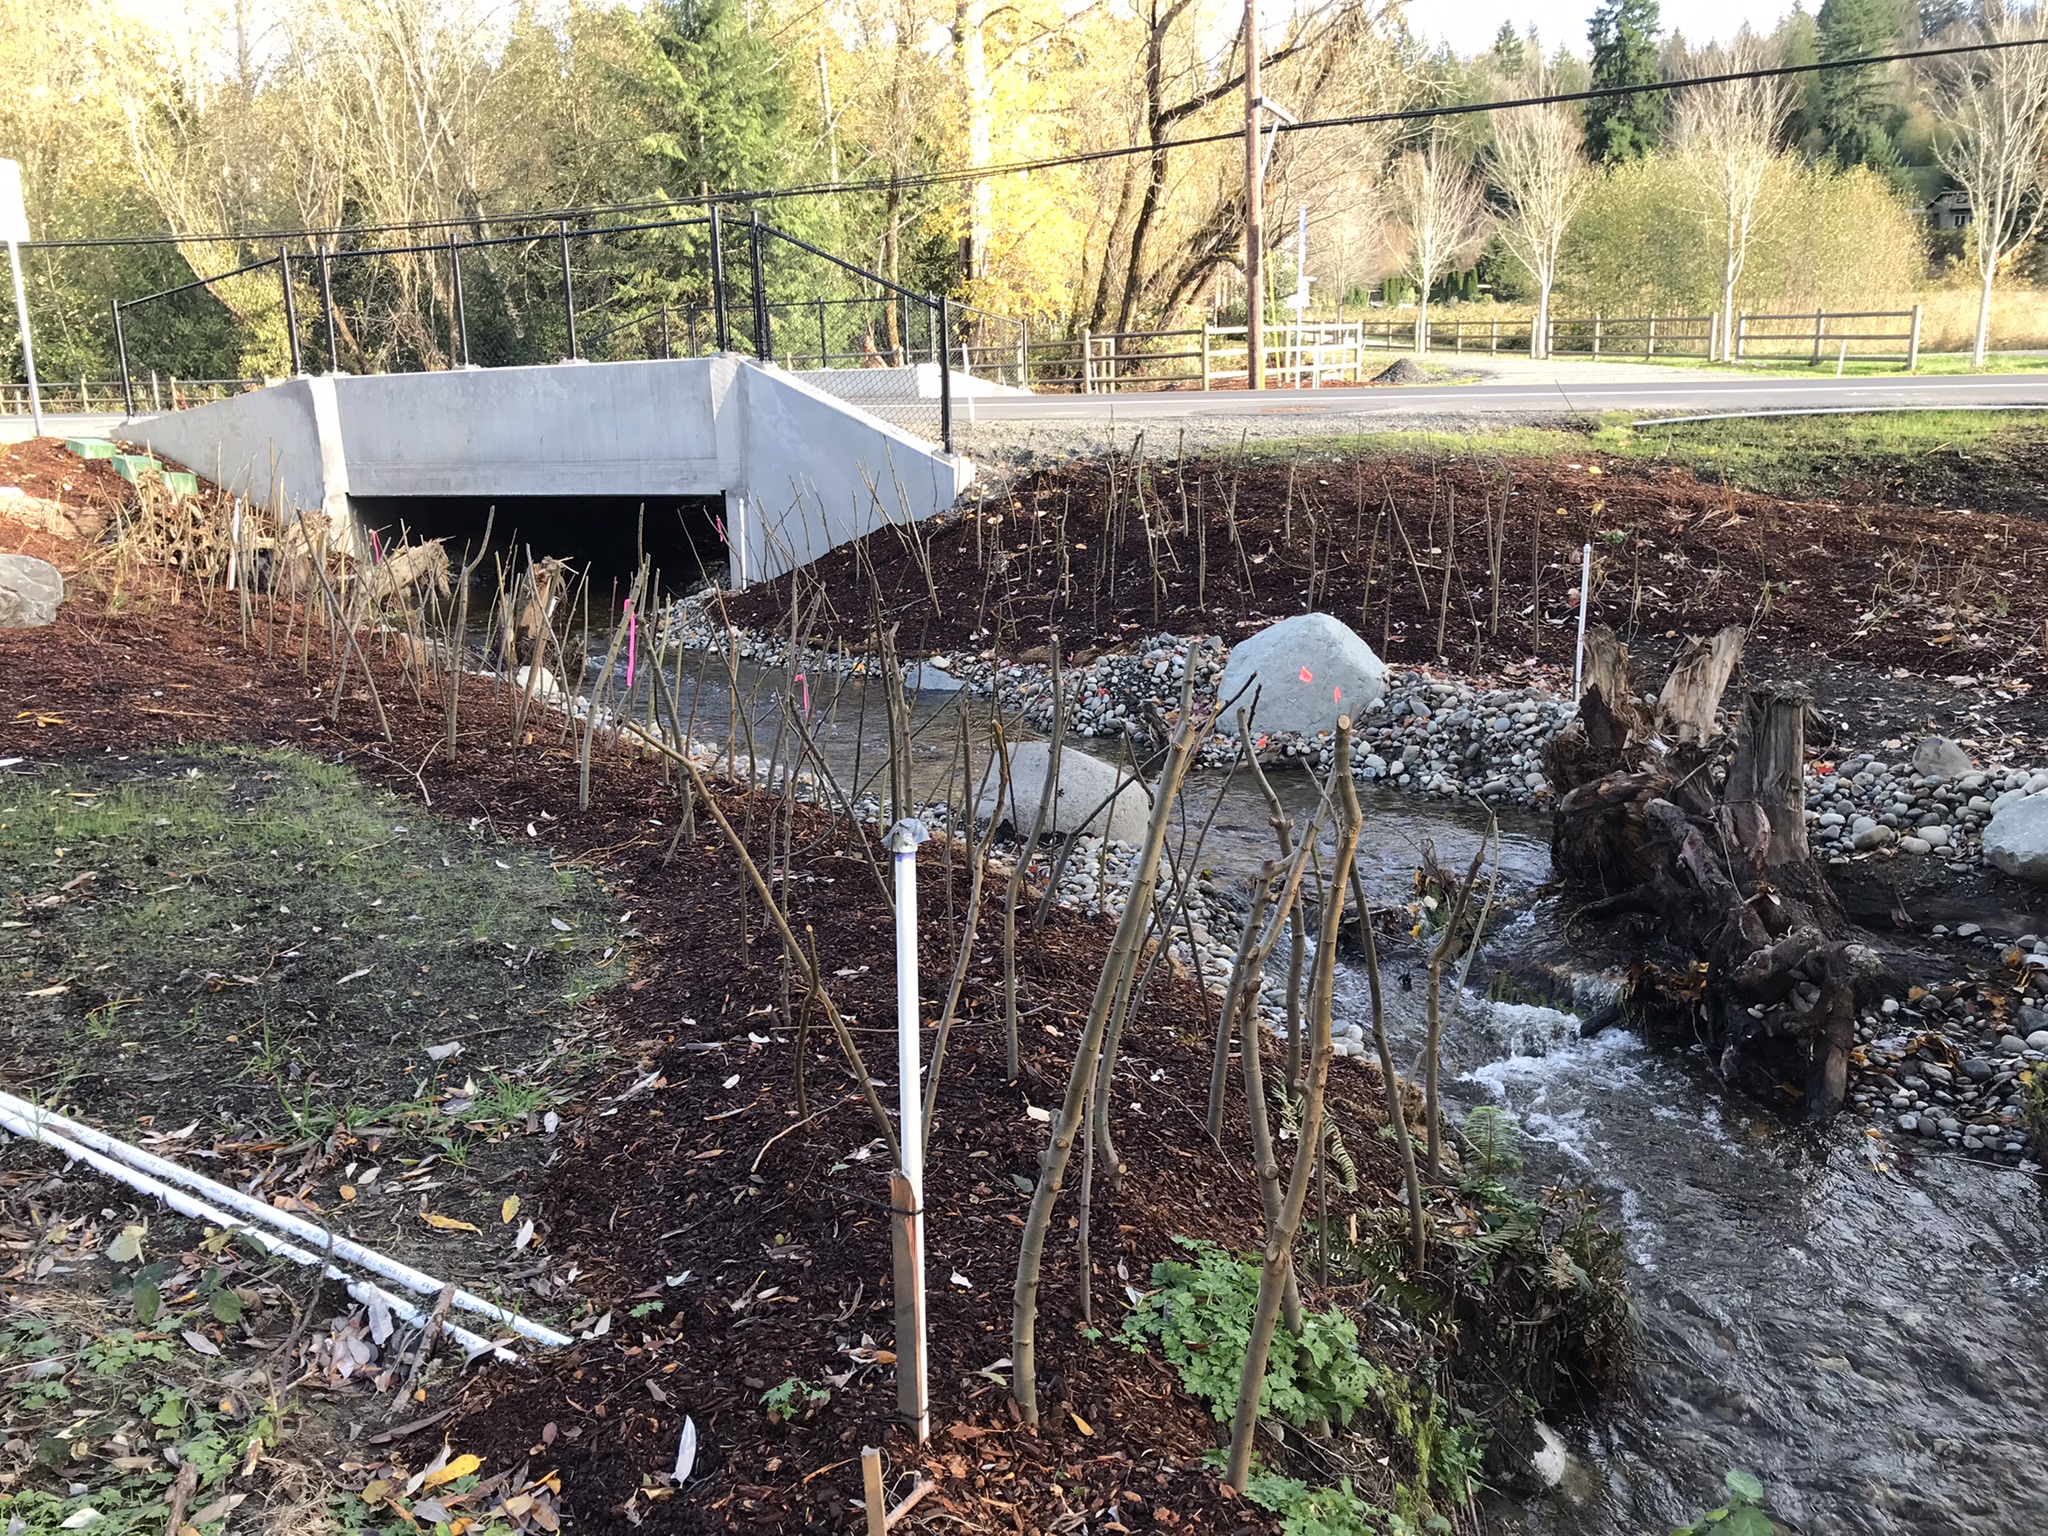 recently installed stream restoration project with culvert under trail, stakes planted on the streambank, and rocks and a log in the creek